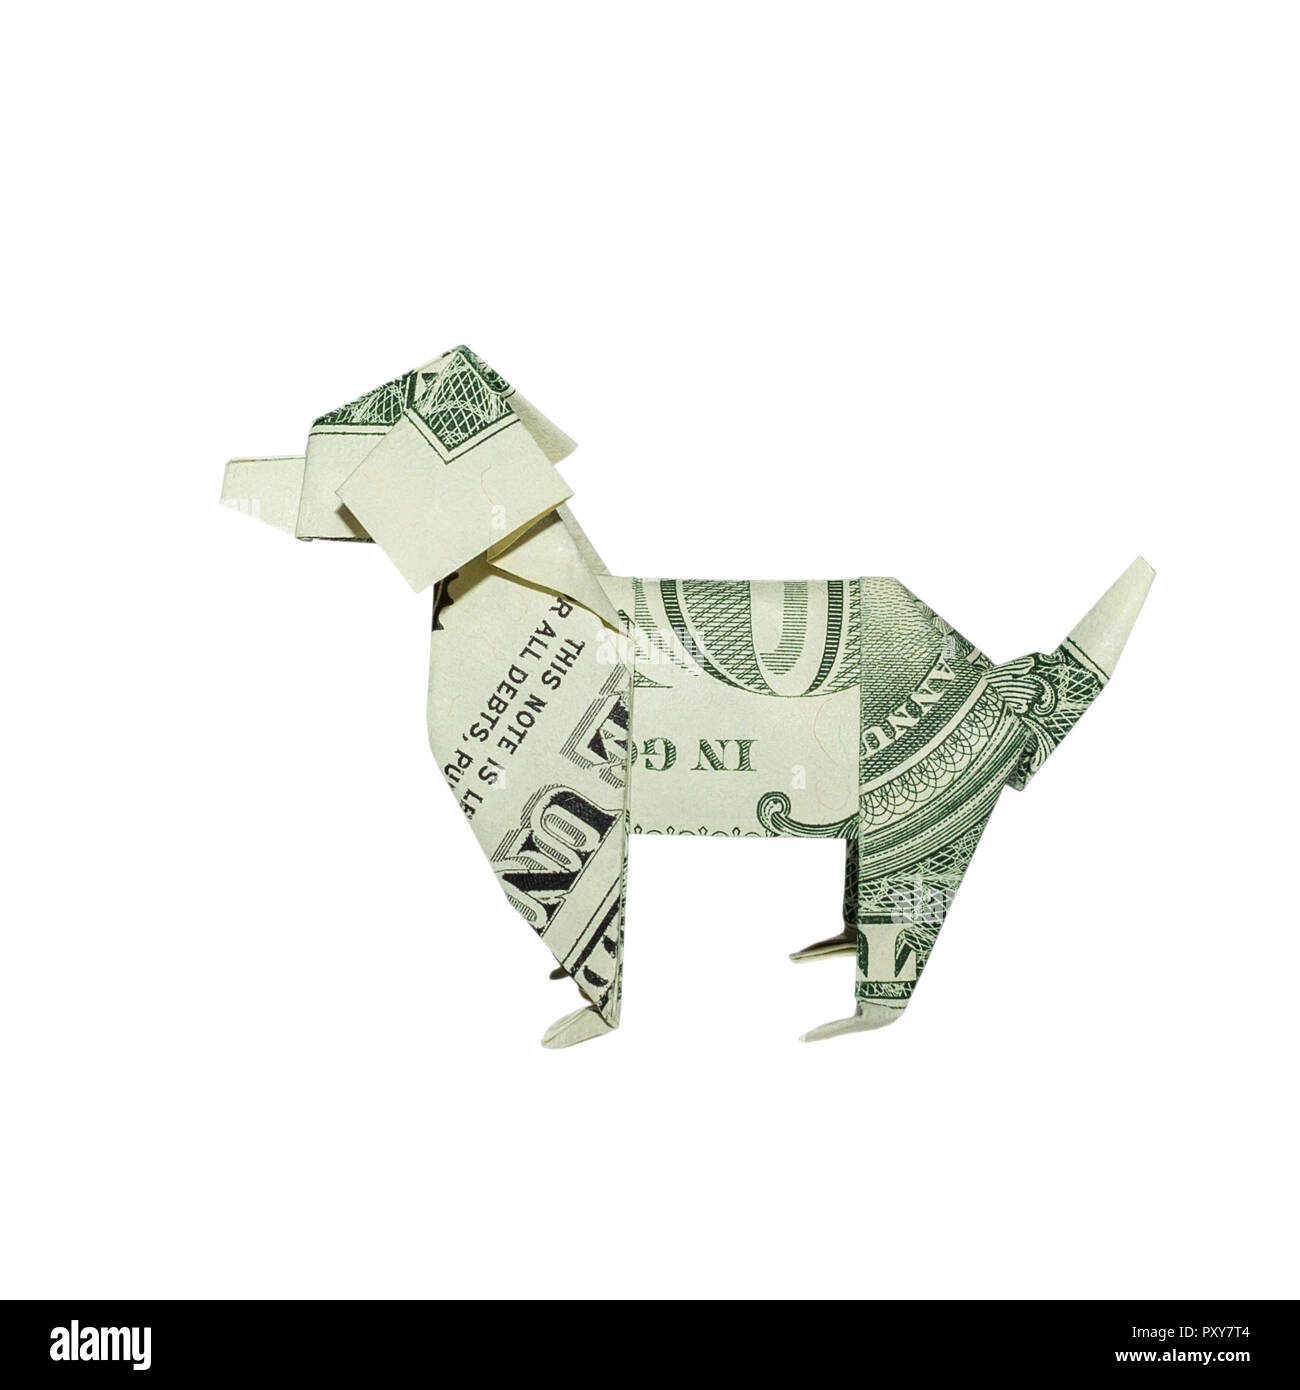 Money Origami Left Side DOG in Profile Folded with Real One Dollar Bill Isolated on White Background Stock Photo